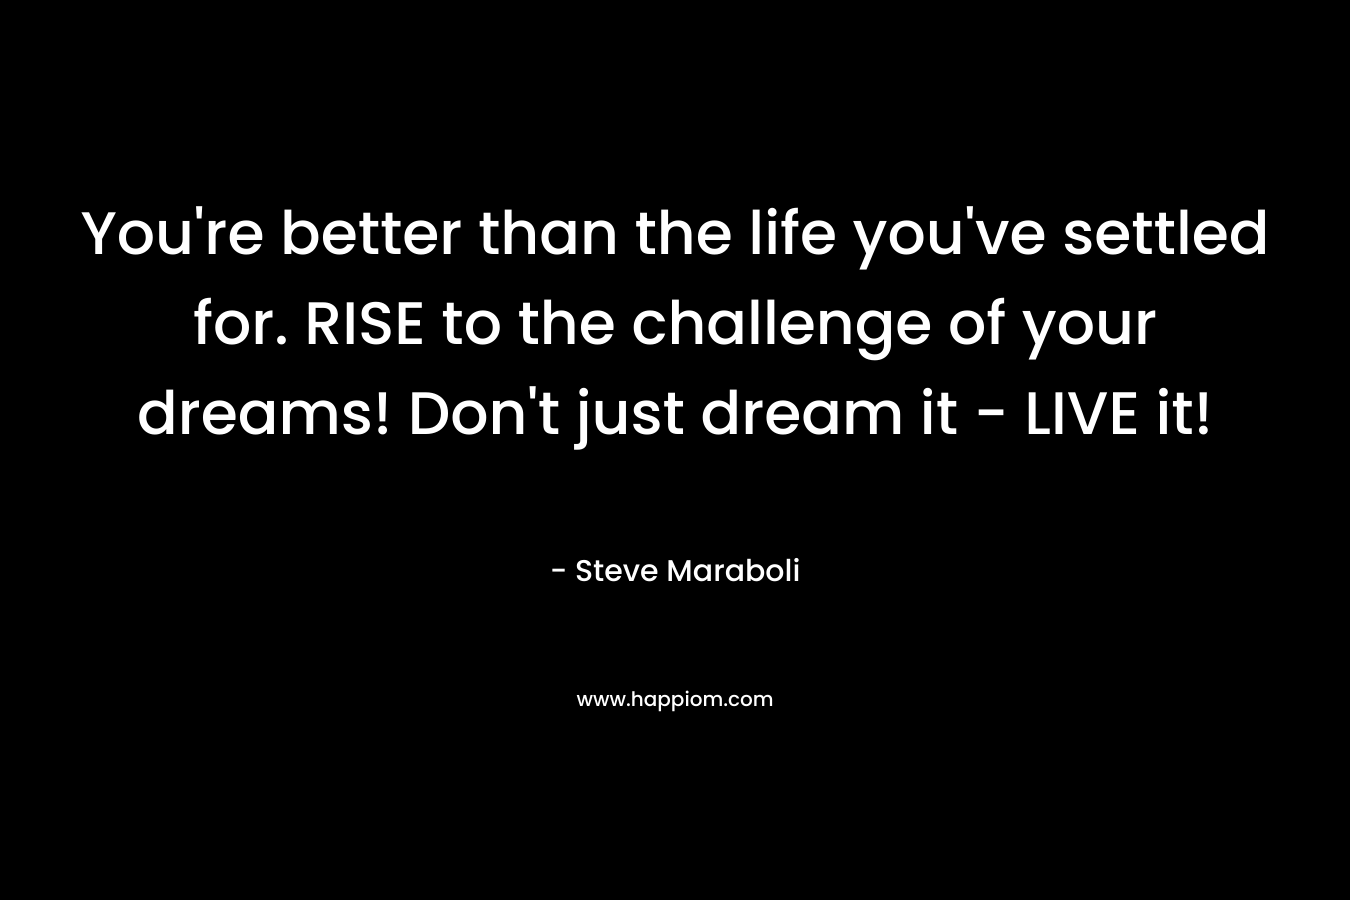 You're better than the life you've settled for. RISE to the challenge of your dreams! Don't just dream it - LIVE it!